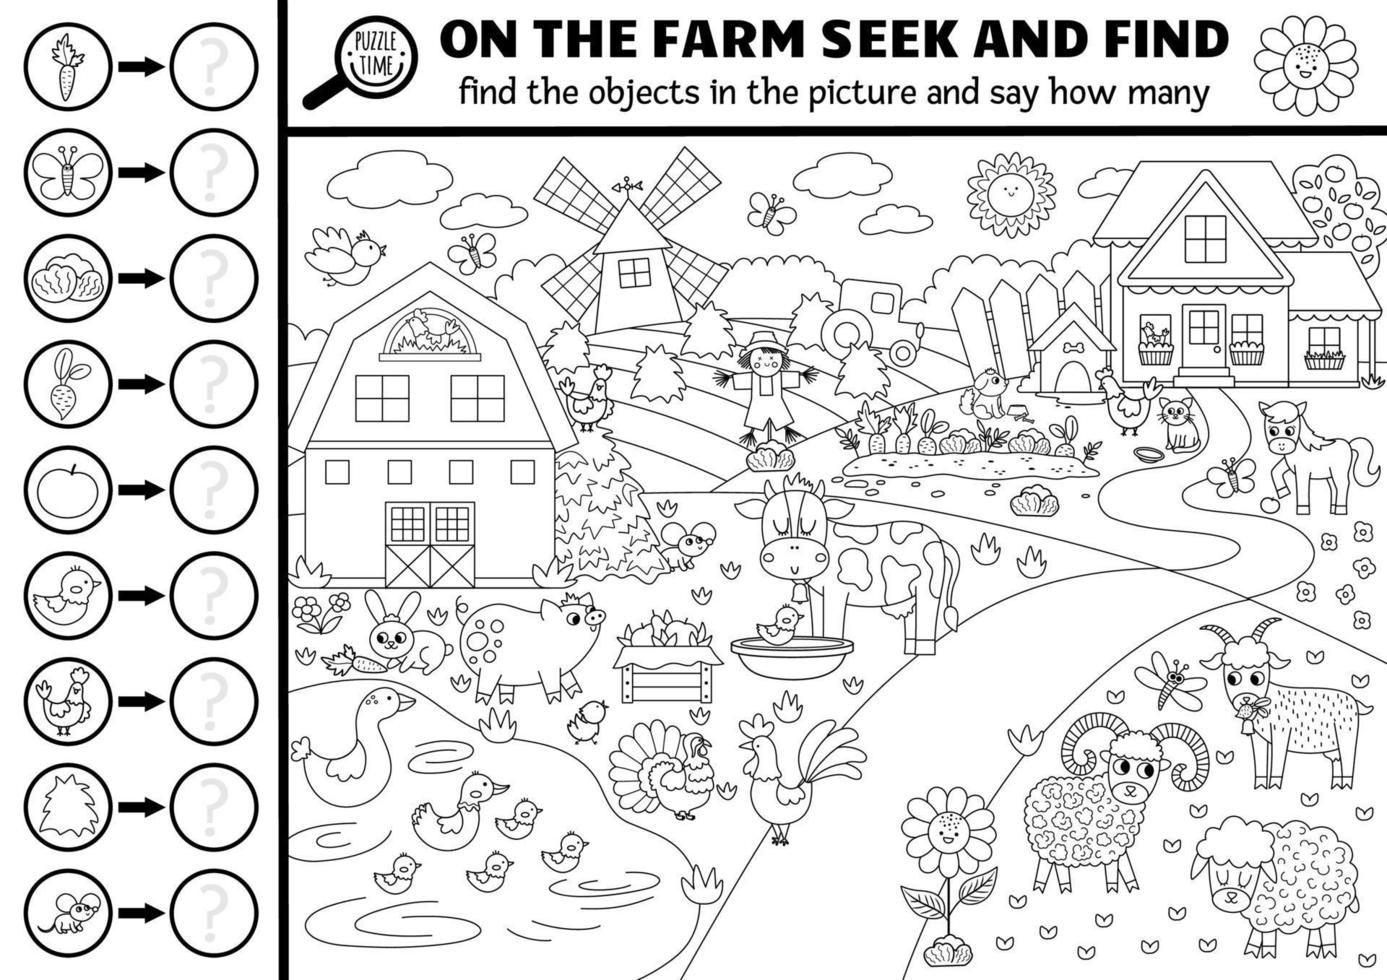 Vector black and white farm searching game with rural countryside landscape. Spot hidden objects, say how many. Simple on the farm seek and find and counting activity or coloring page